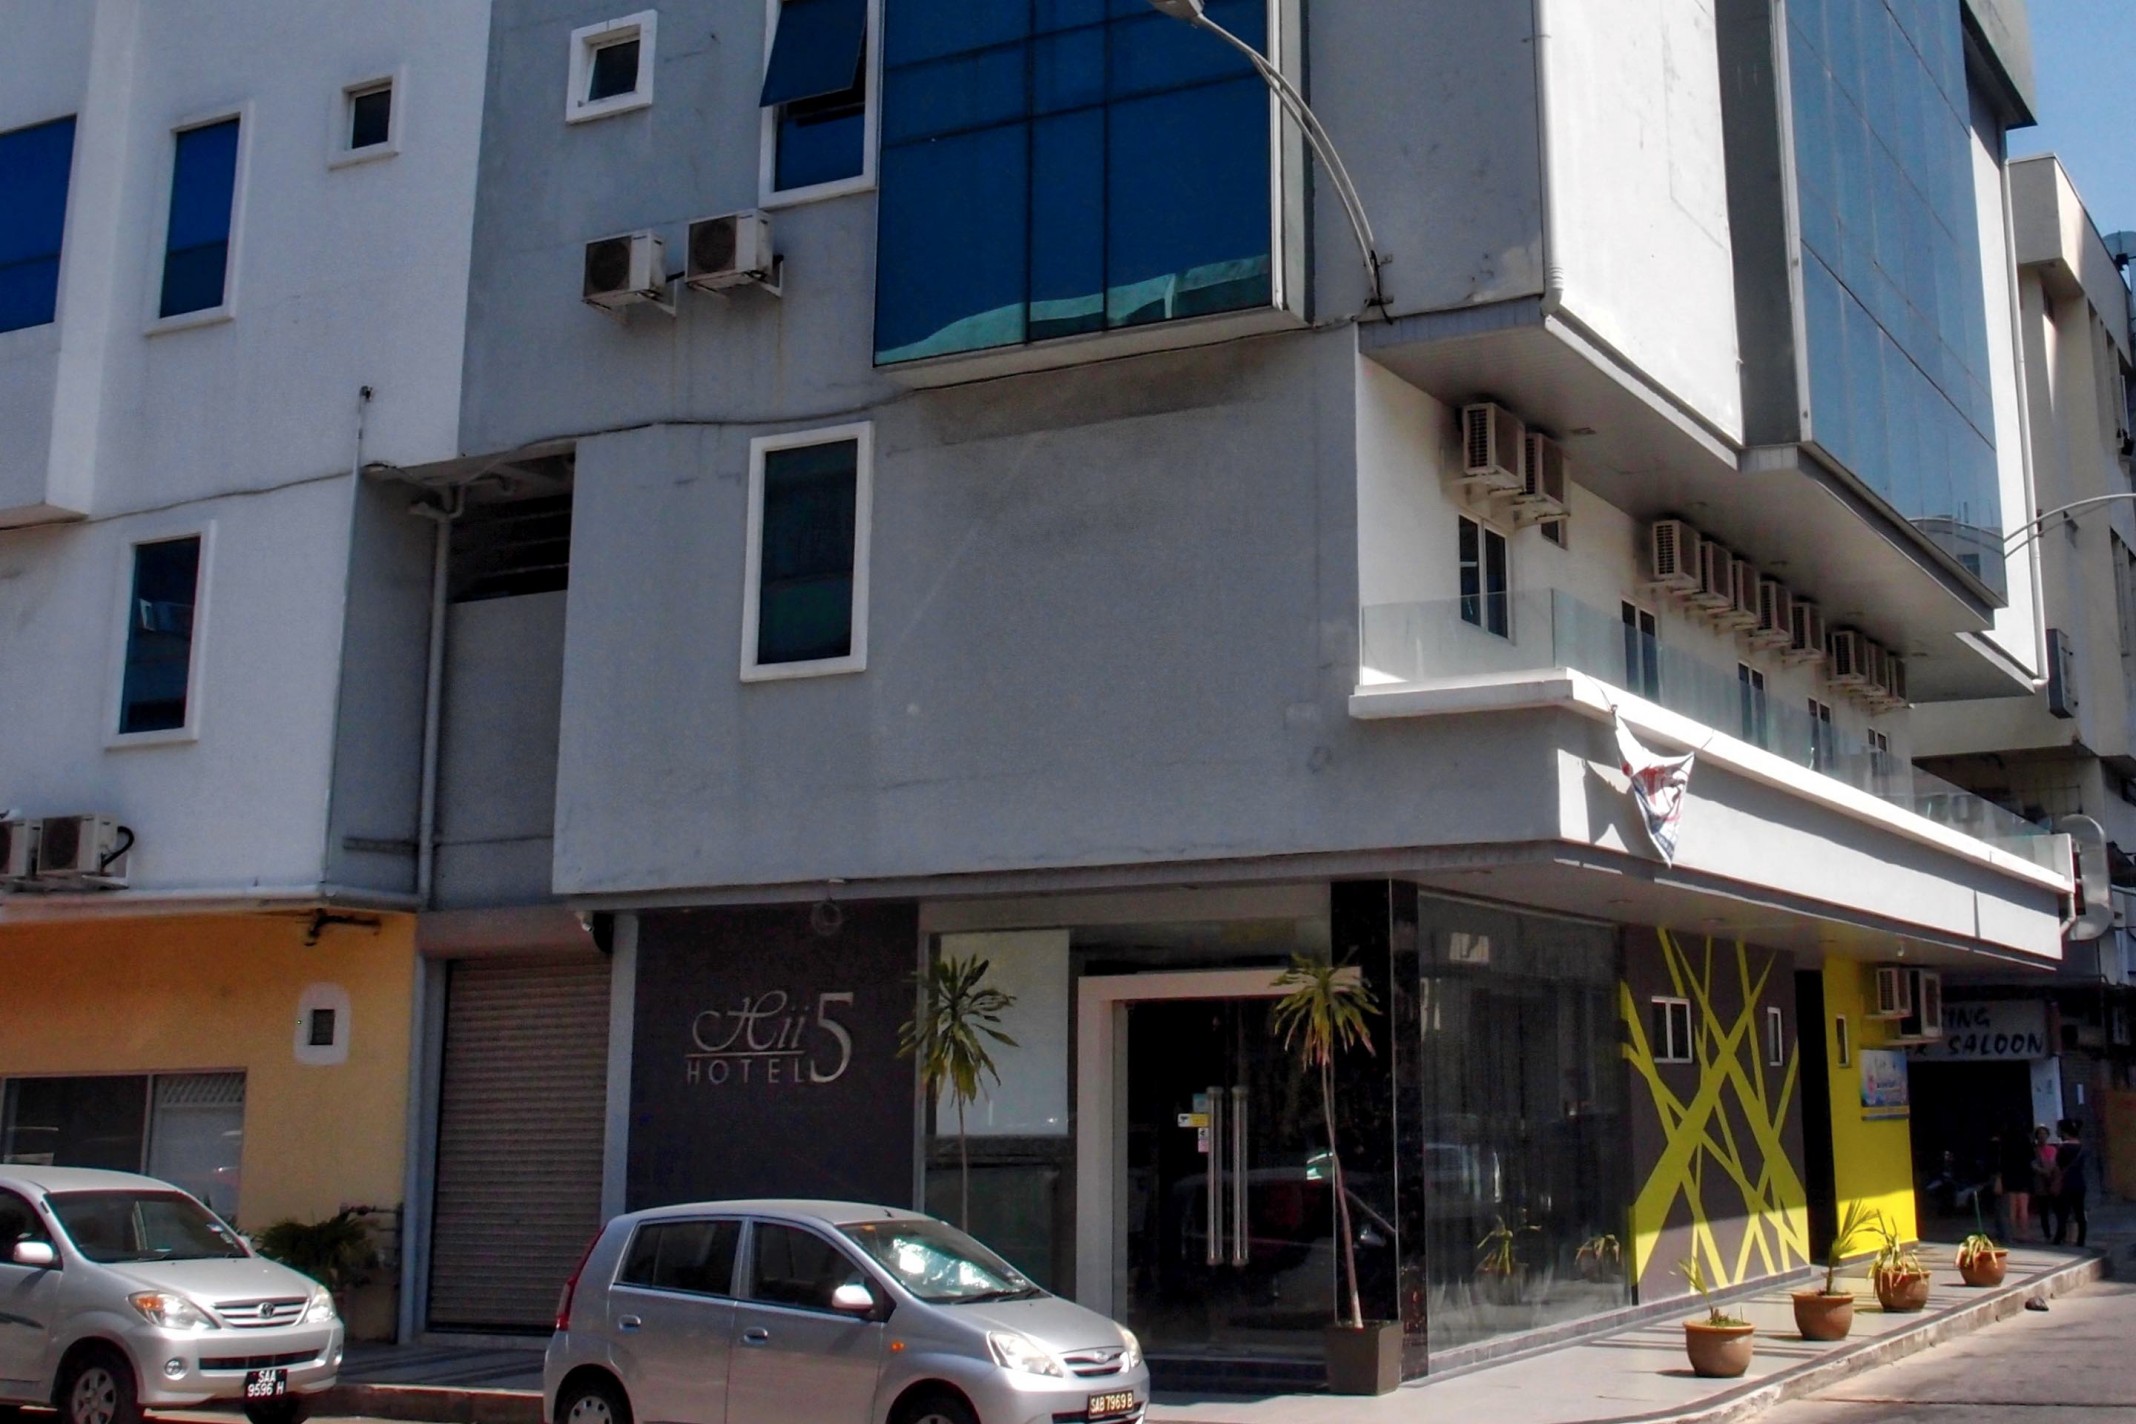 An independent review of Hii-5 Hotel in Kota Kinabalu.